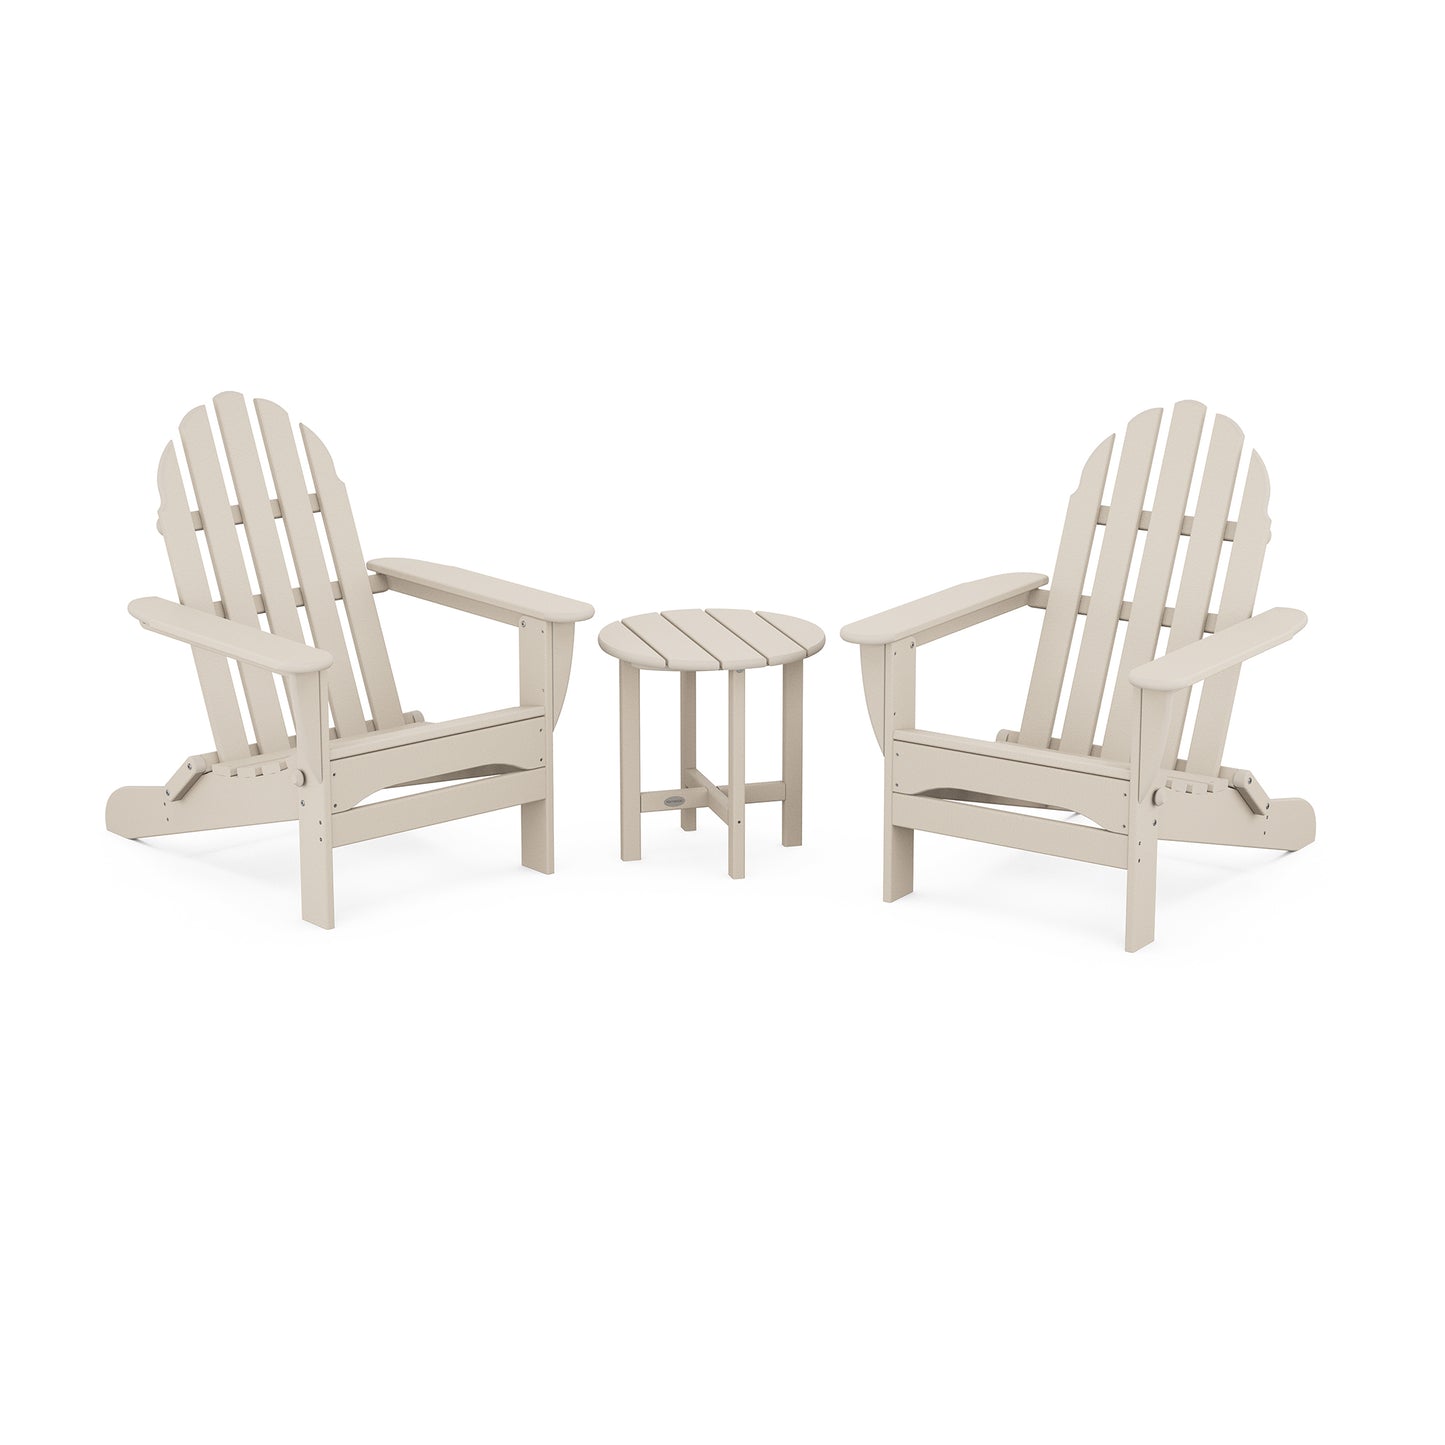 Two beige POLYWOOD® Classic Folding Adirondack 3-Piece Sets with a small matching side table, known for their outdoor durability, set against a white background.